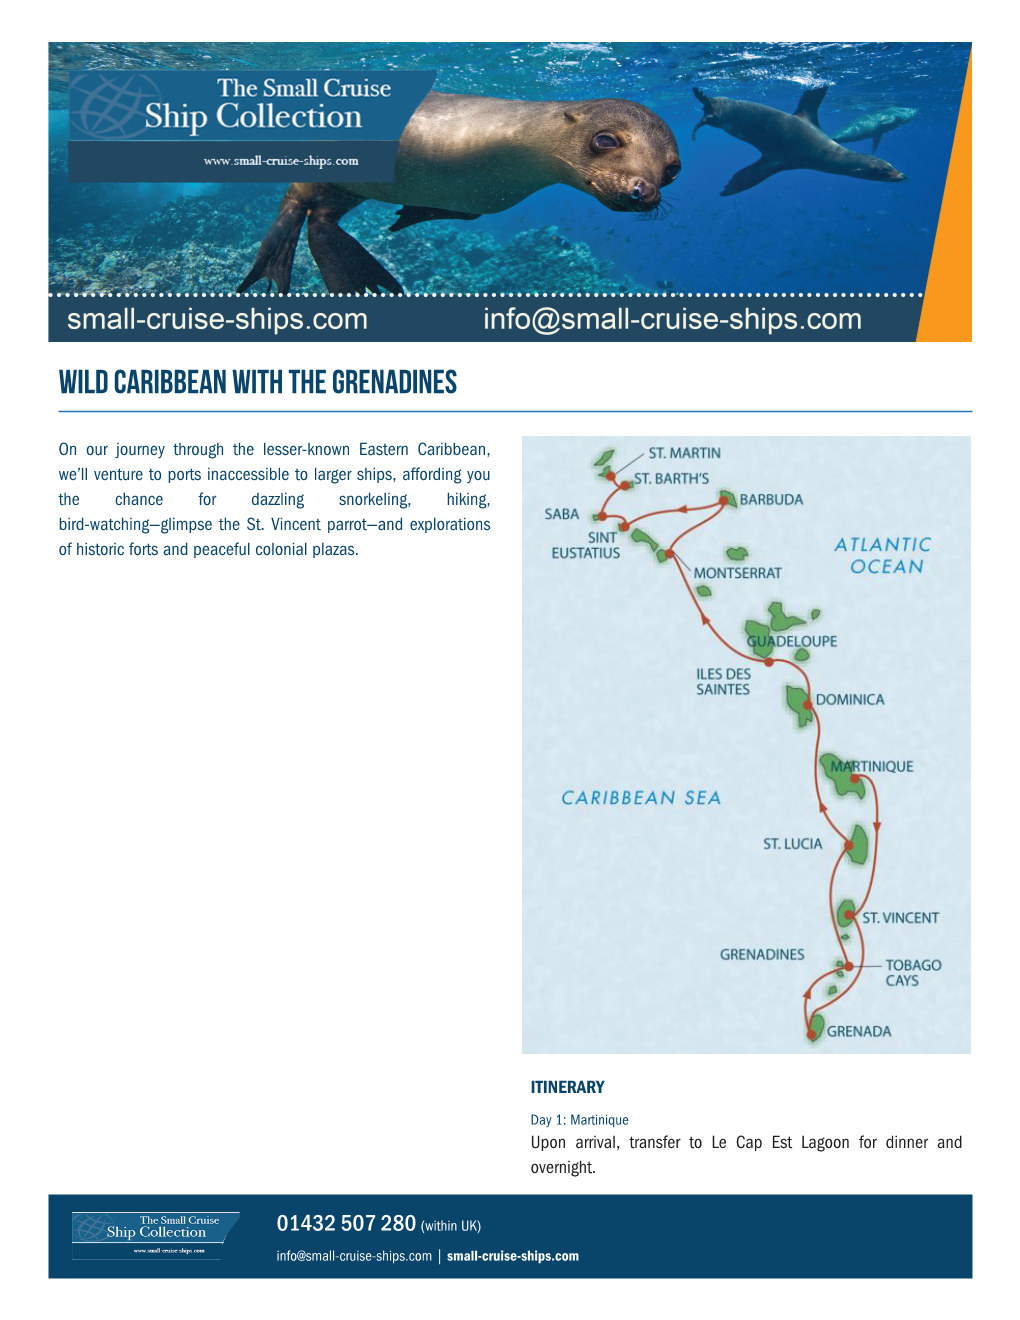 Wild Caribbean with the Grenadines